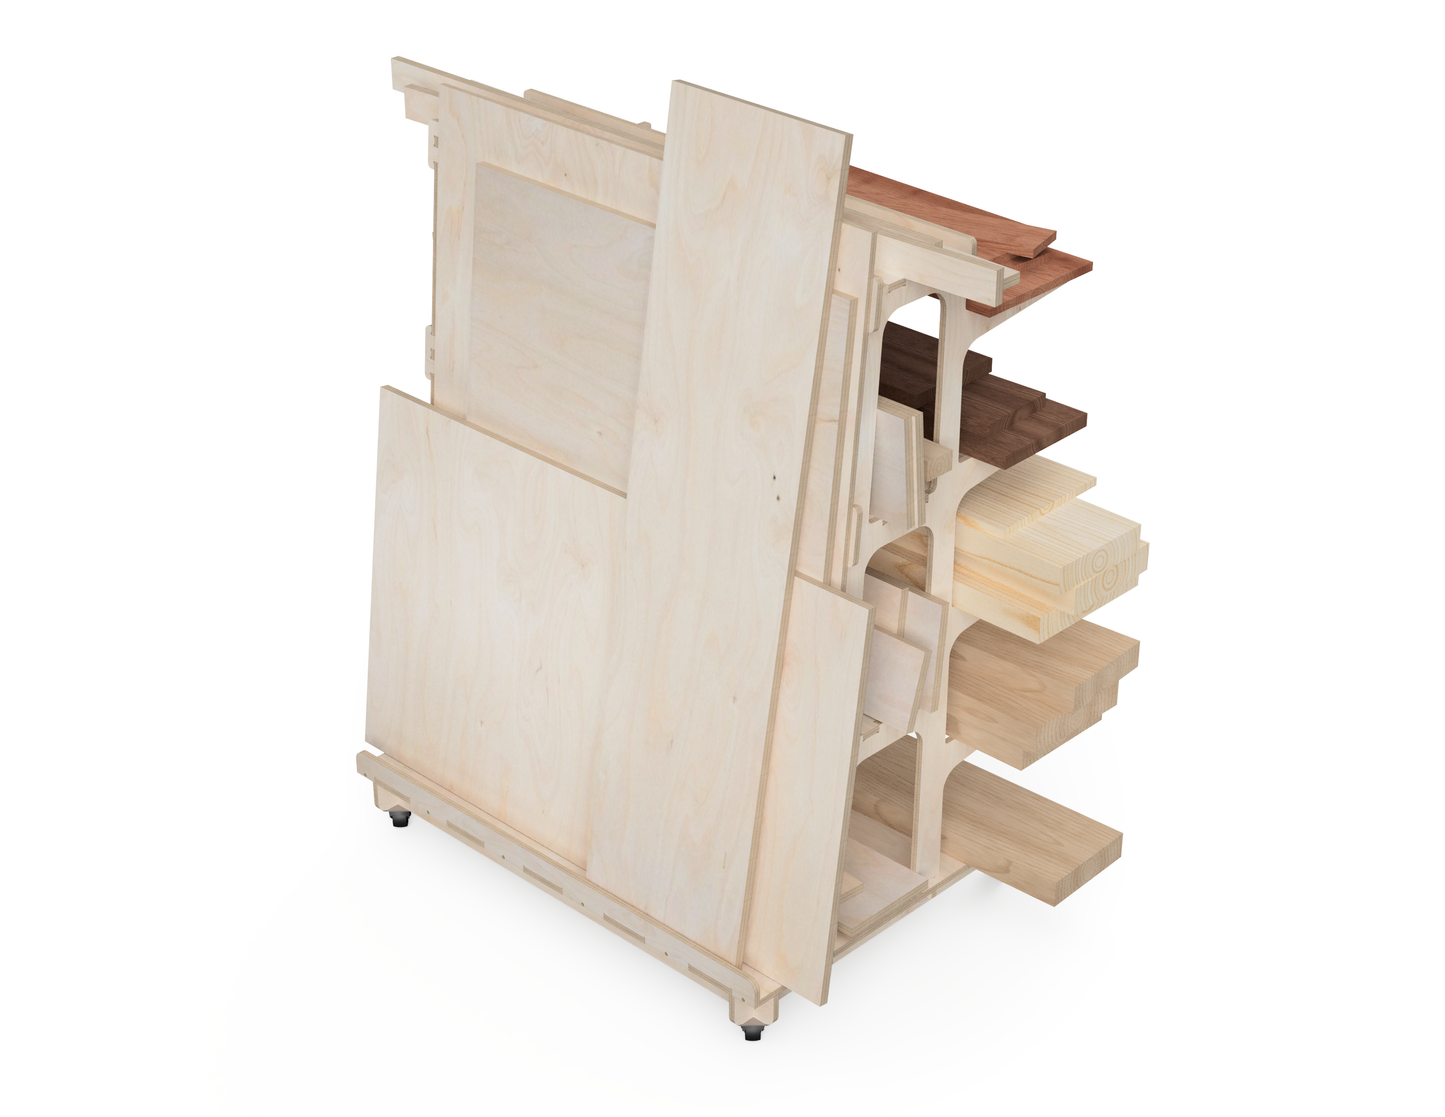 Material Storage Stand - Woodworker DXF files